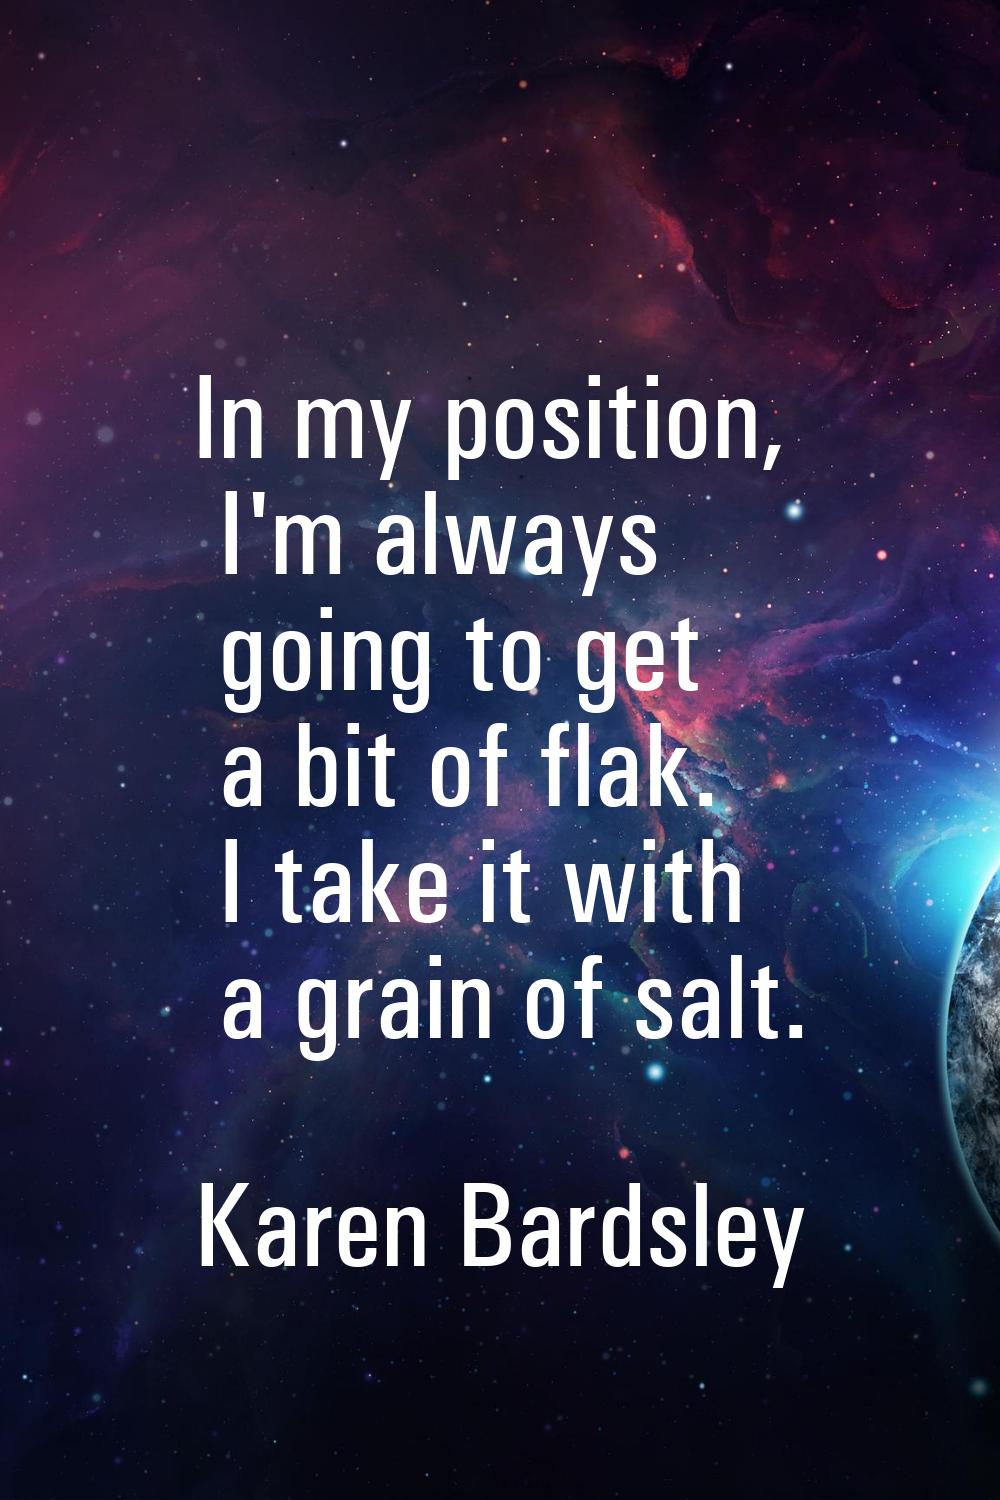 In my position, I'm always going to get a bit of flak. I take it with a grain of salt.